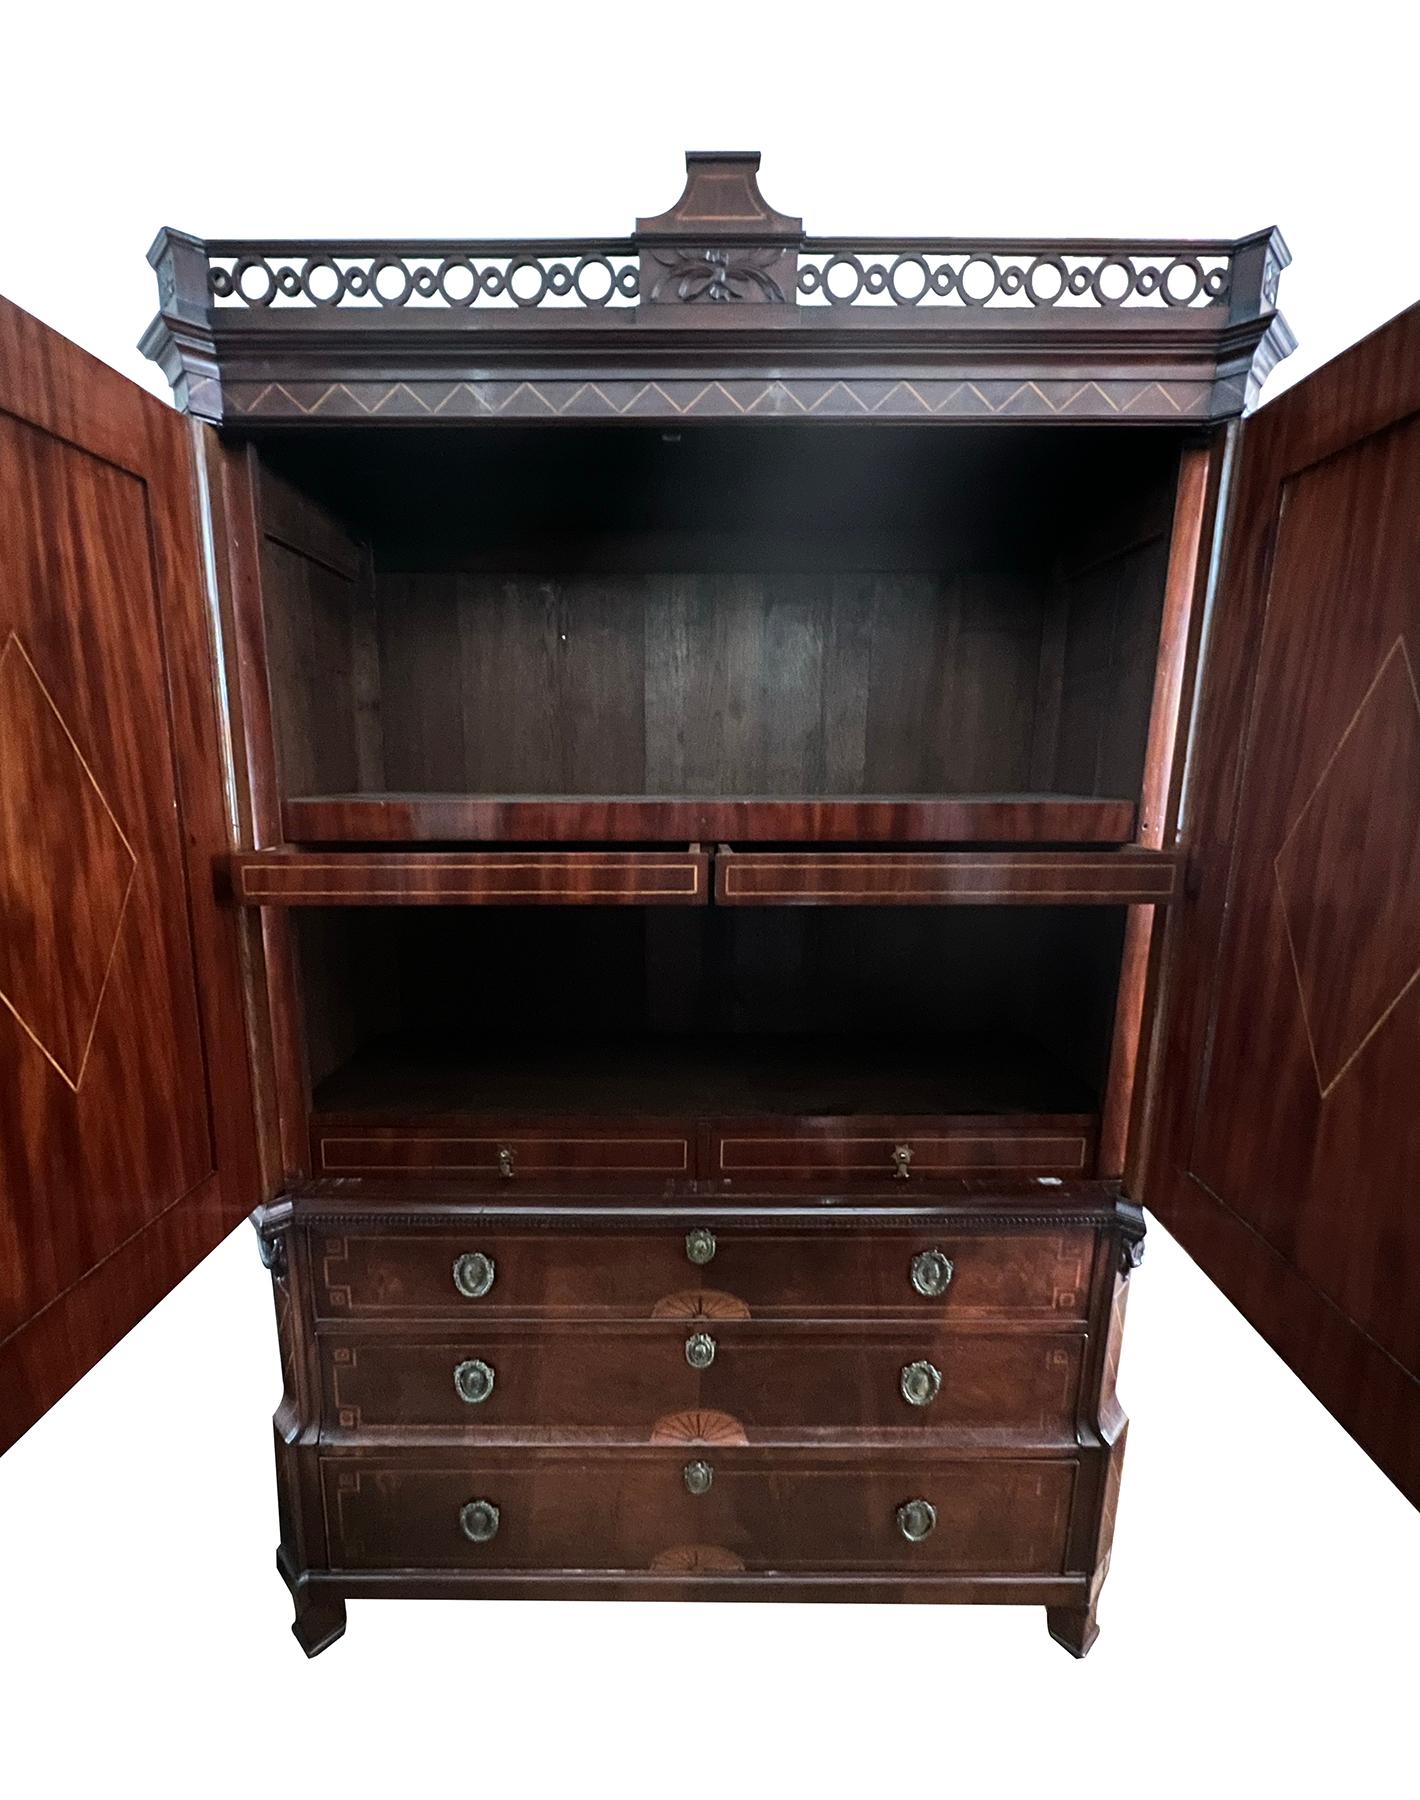 Of fine quality, the tall and impressive cabinet in the neoclassical taste with canted corners all capped by a pierced gallery above a case fitted with two hinged doors of book-matched mahogany veneer centering inlaid shell medallions below drapery